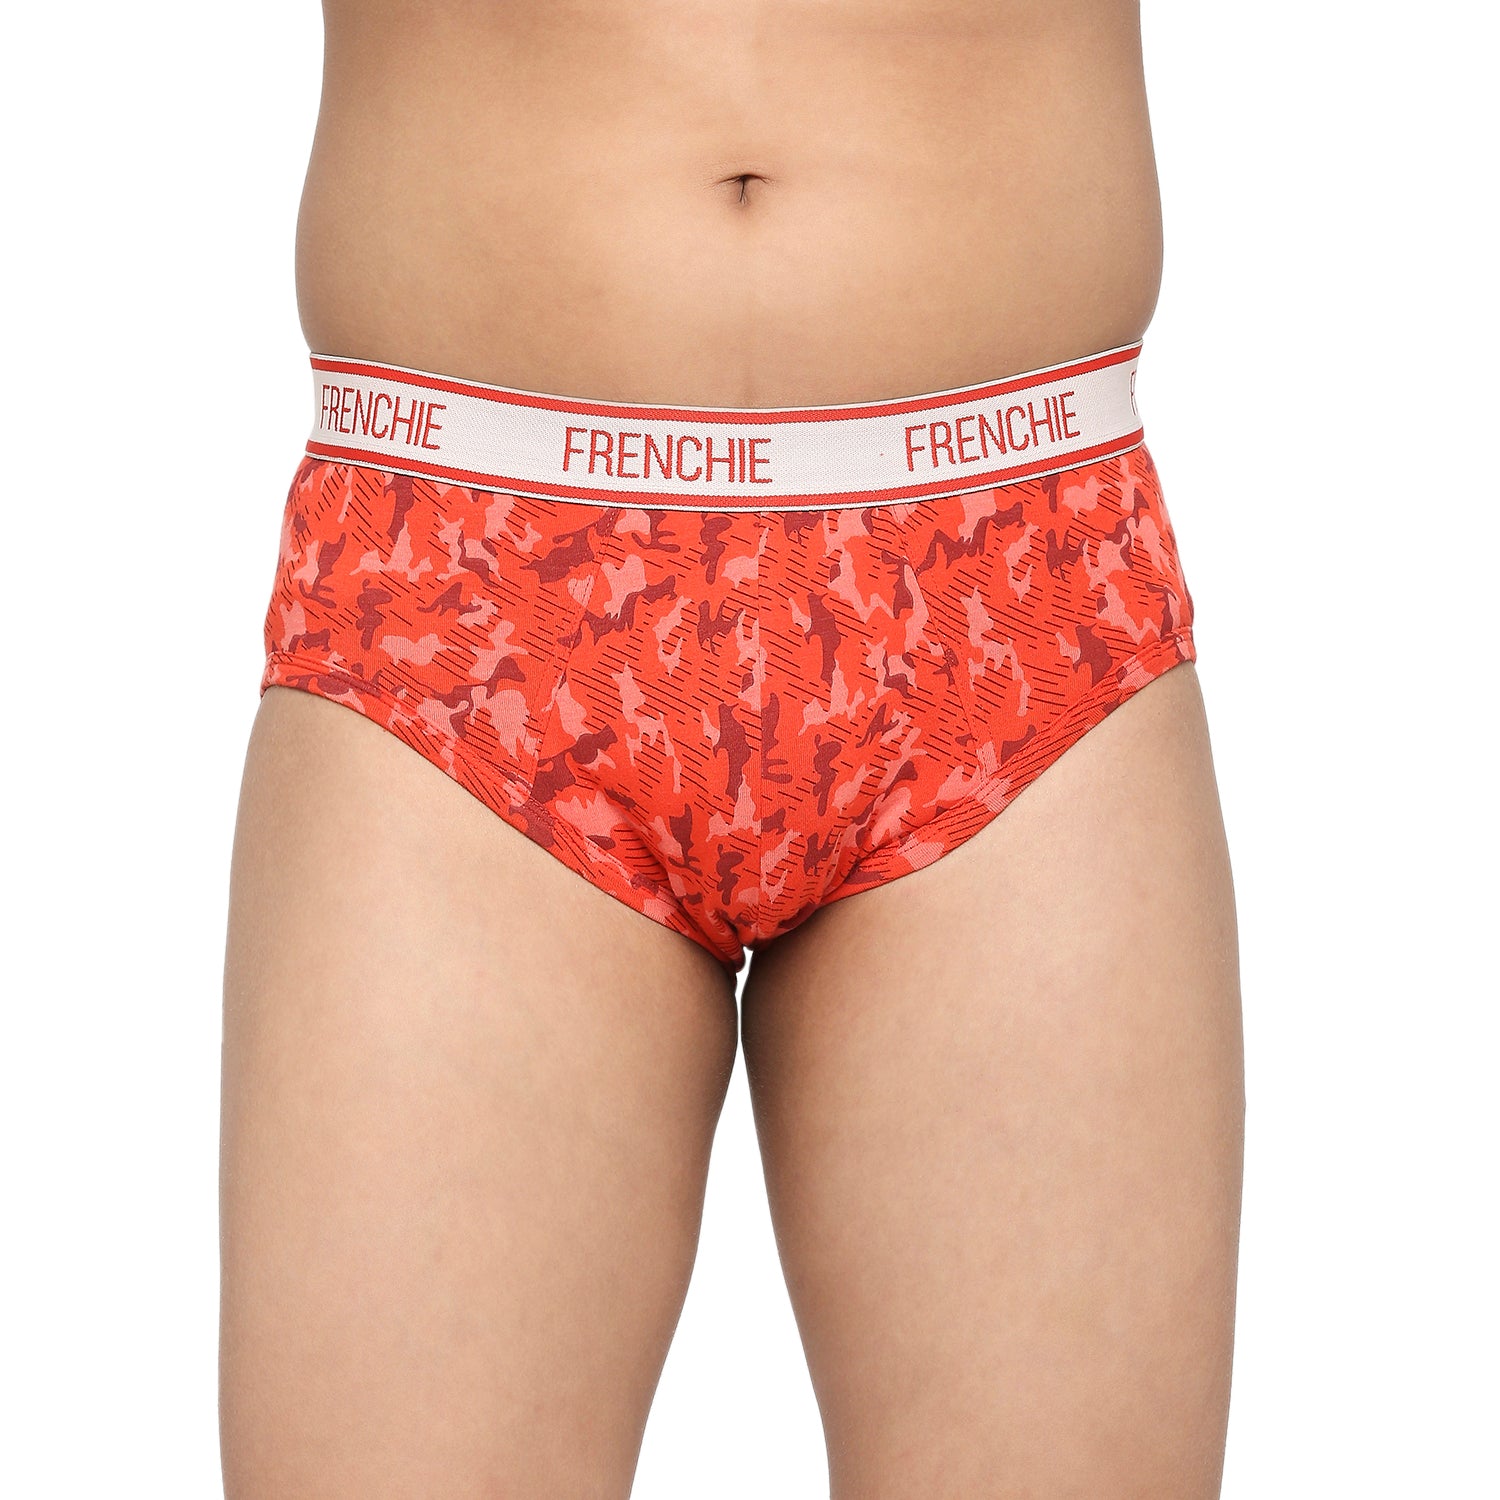 Buy Frenchie Casuals 4000 Mens Cotton Briefs Assorted Colours (Pack of 6)  online